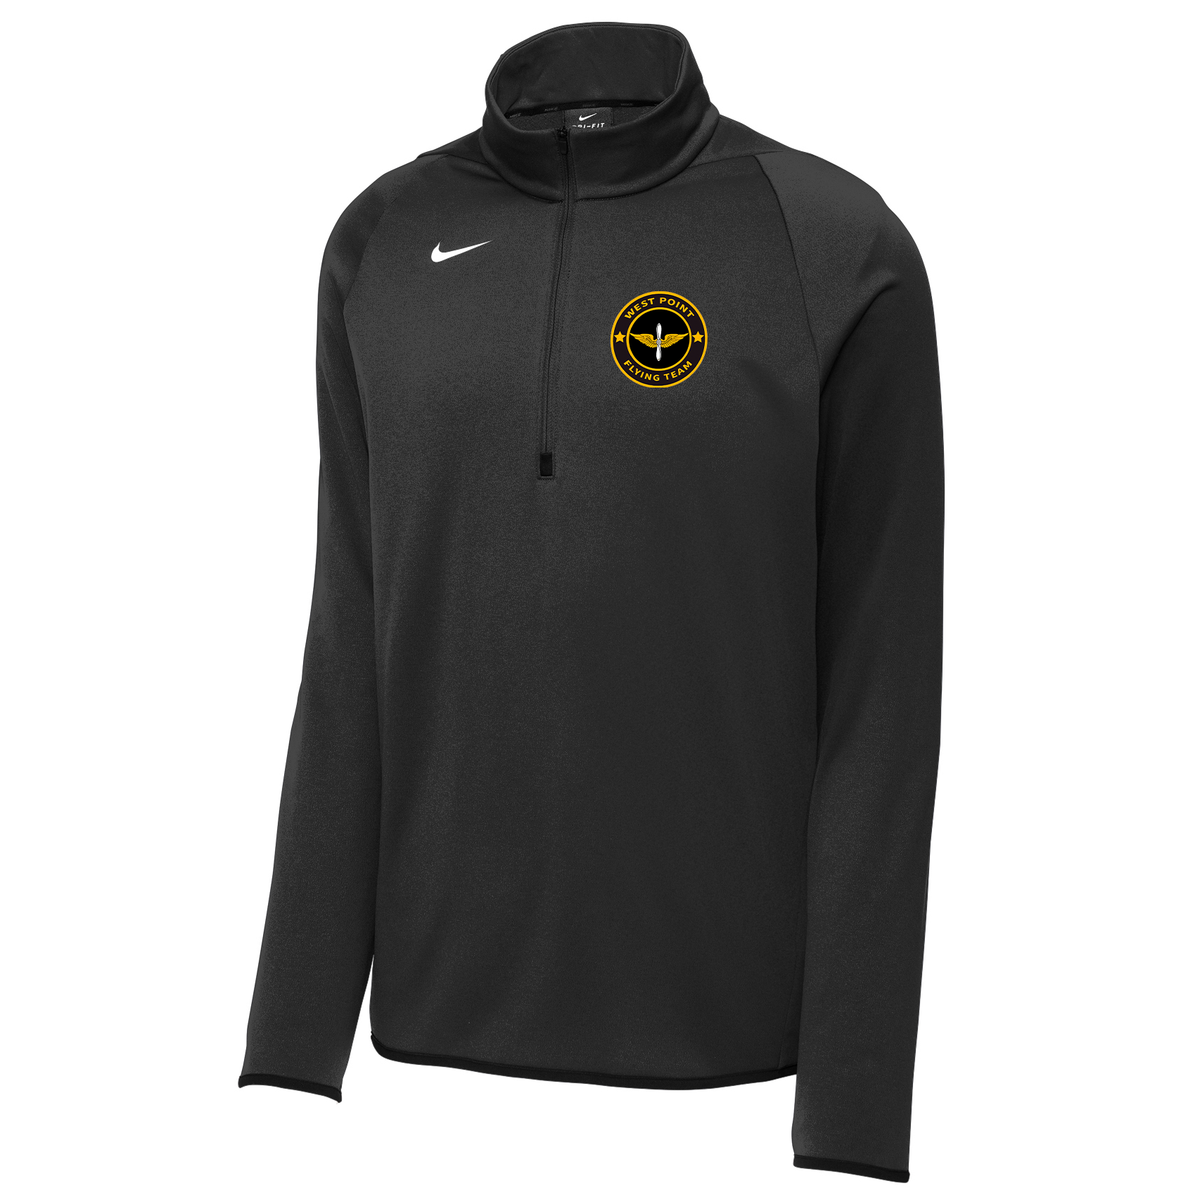 West Point Flight Team Limited Edition Nike 1/4 Zip